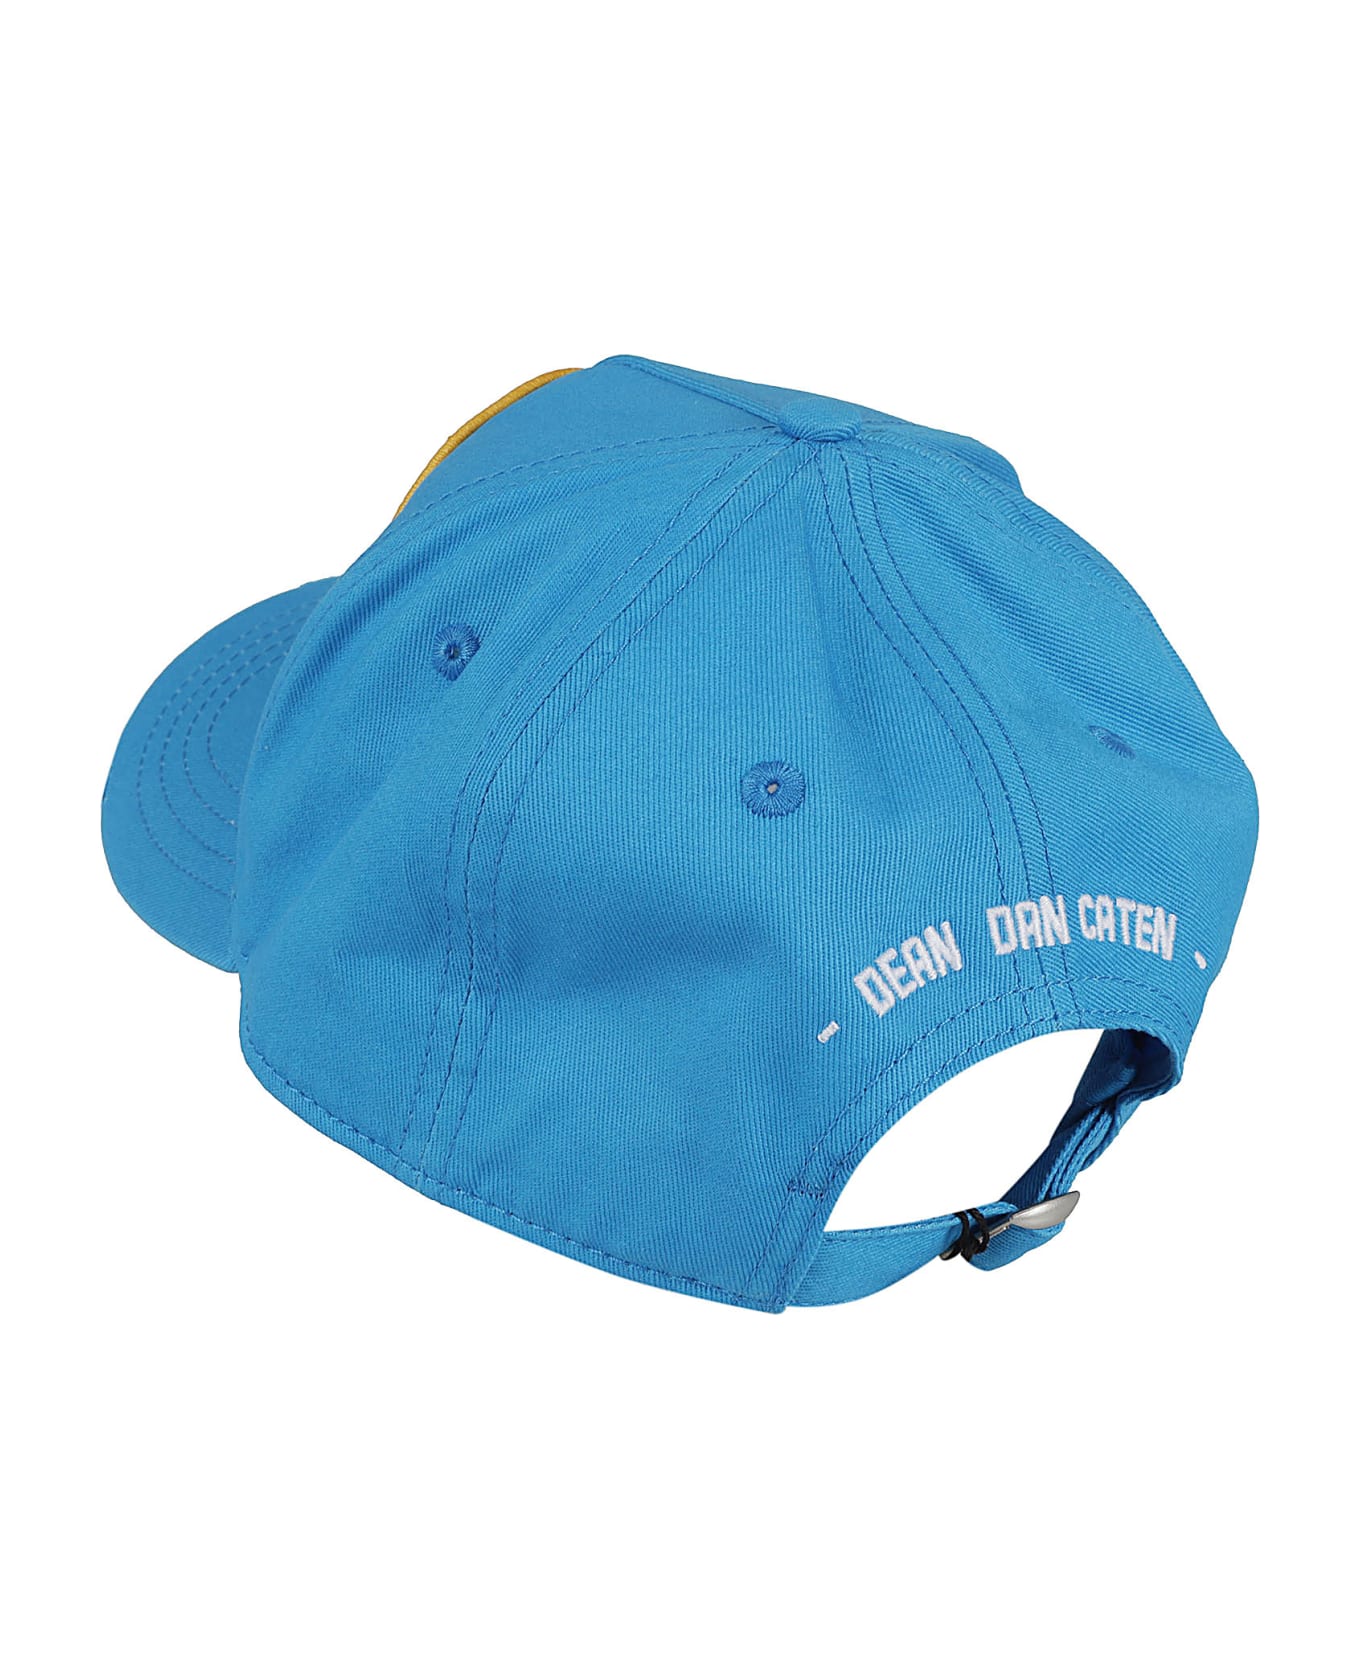 Dsquared2 Patched Baseball Cap - Sky Blue 帽子